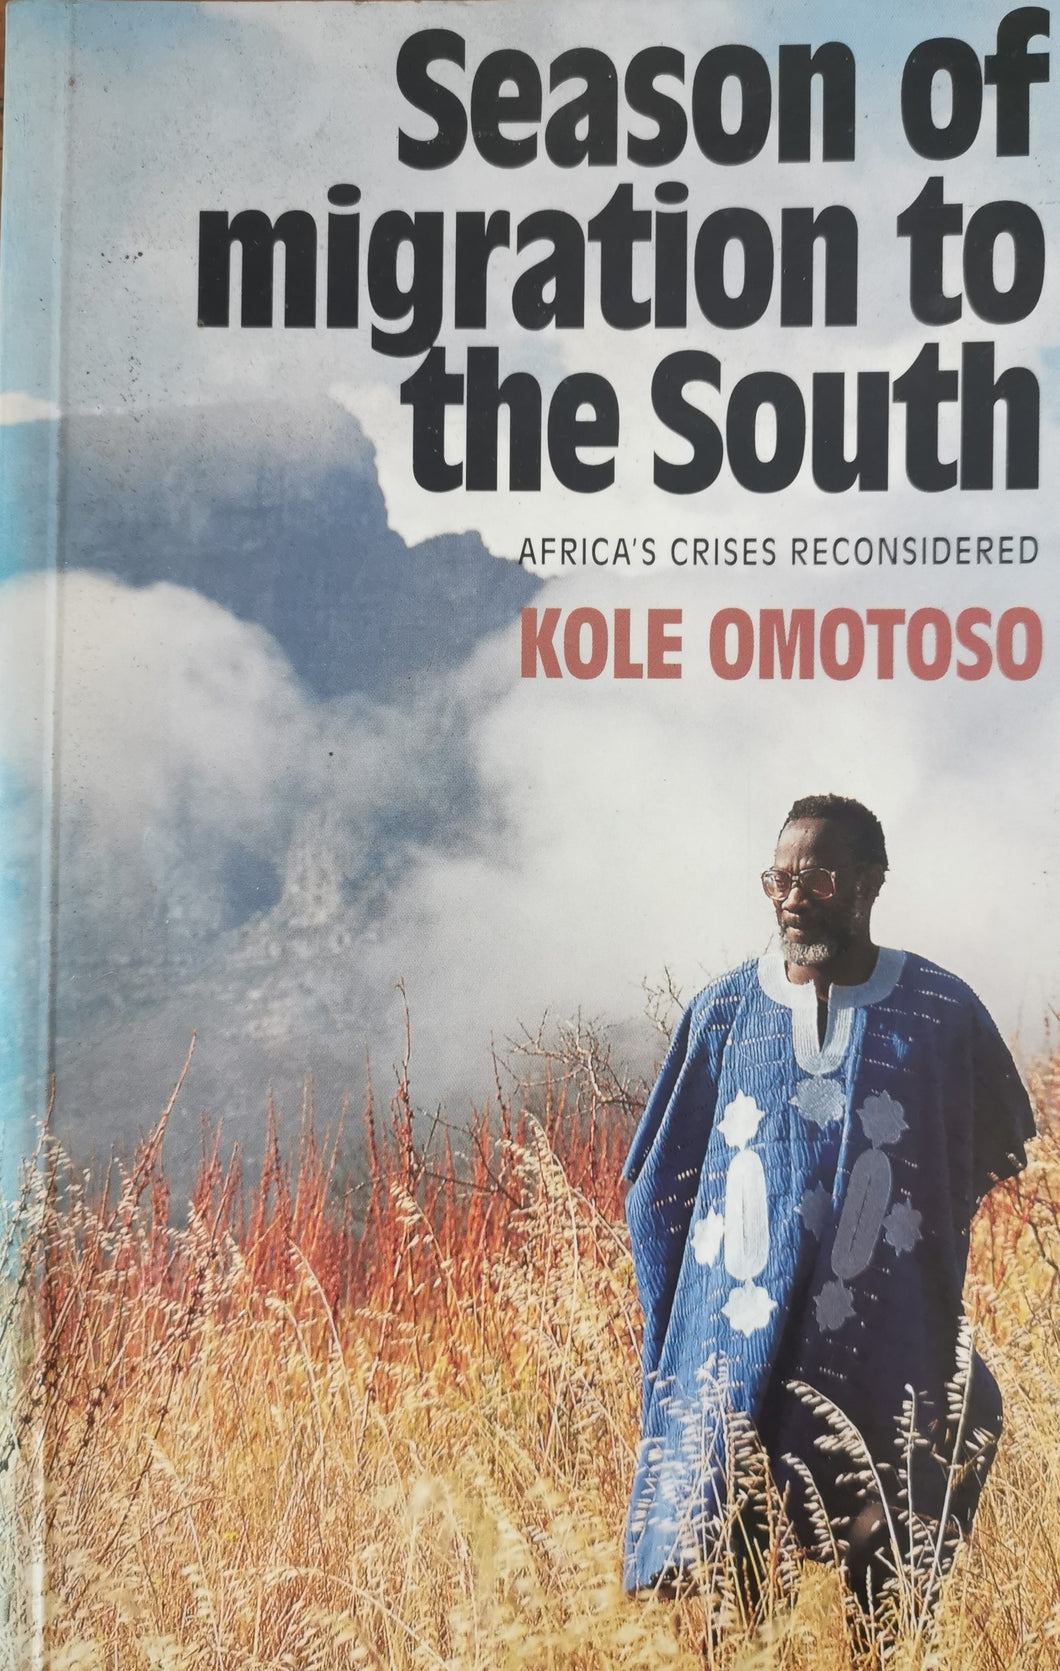 Season of Migration to the South: Africa's Crises Reconsidered - Kole Omotoso